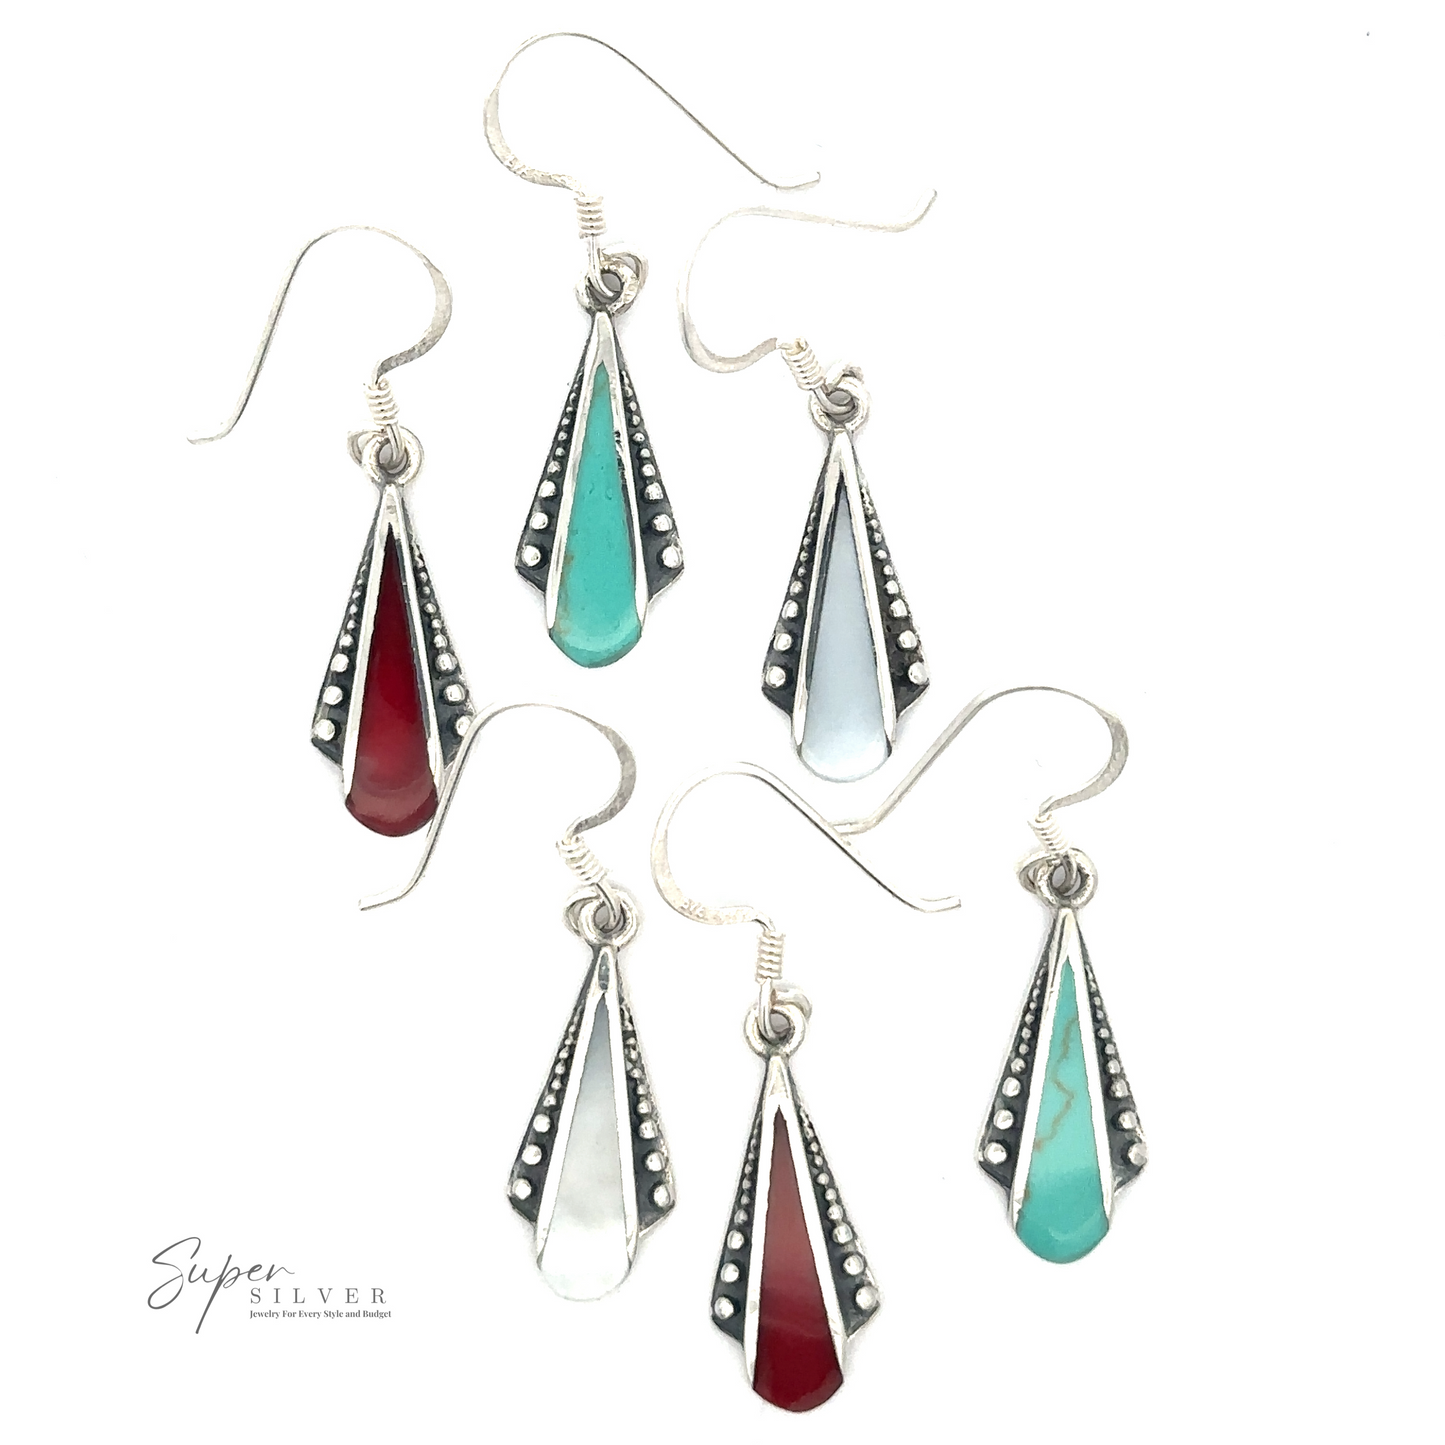 
                  
                    Three pairs of Inlaid Teardrop Shaped Bali Inspired Earrings with hook fastenings. Each pair features teardrop-shaped stones in red, turquoise, and white, set in sterling silver with decorative accents. These stunning earrings offer a touch of exotic elegance to any outfit.
                  
                